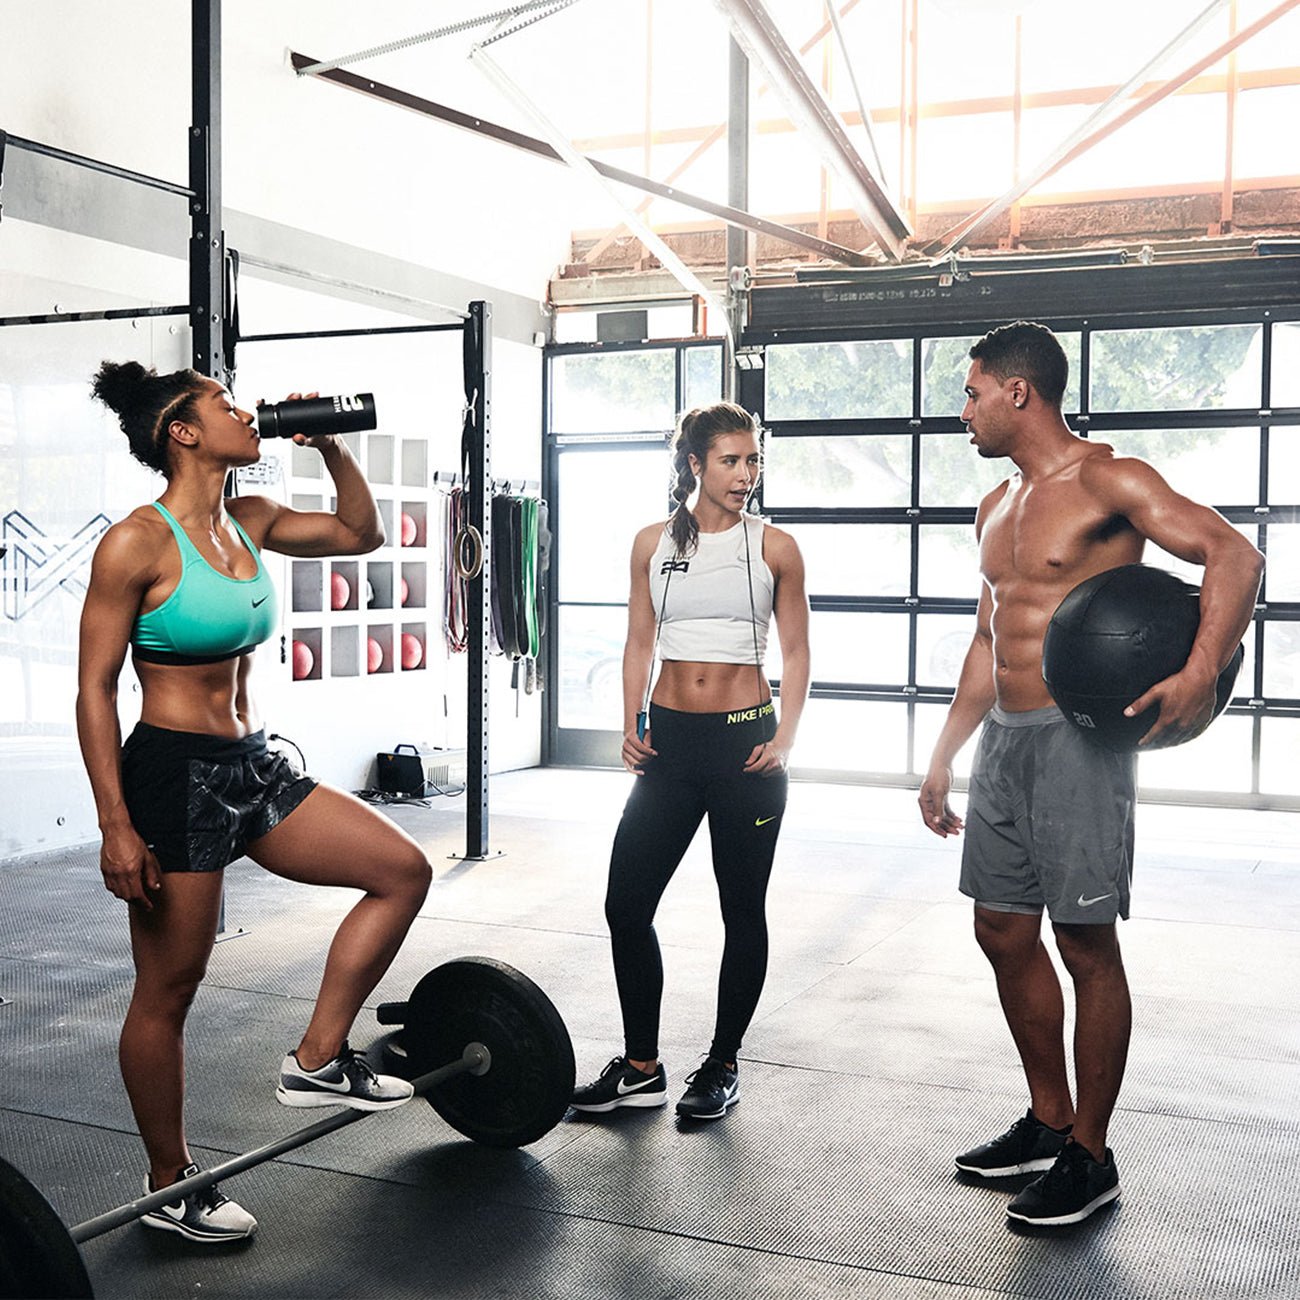 Your beginners guide to a success gym session - HerbaChoices